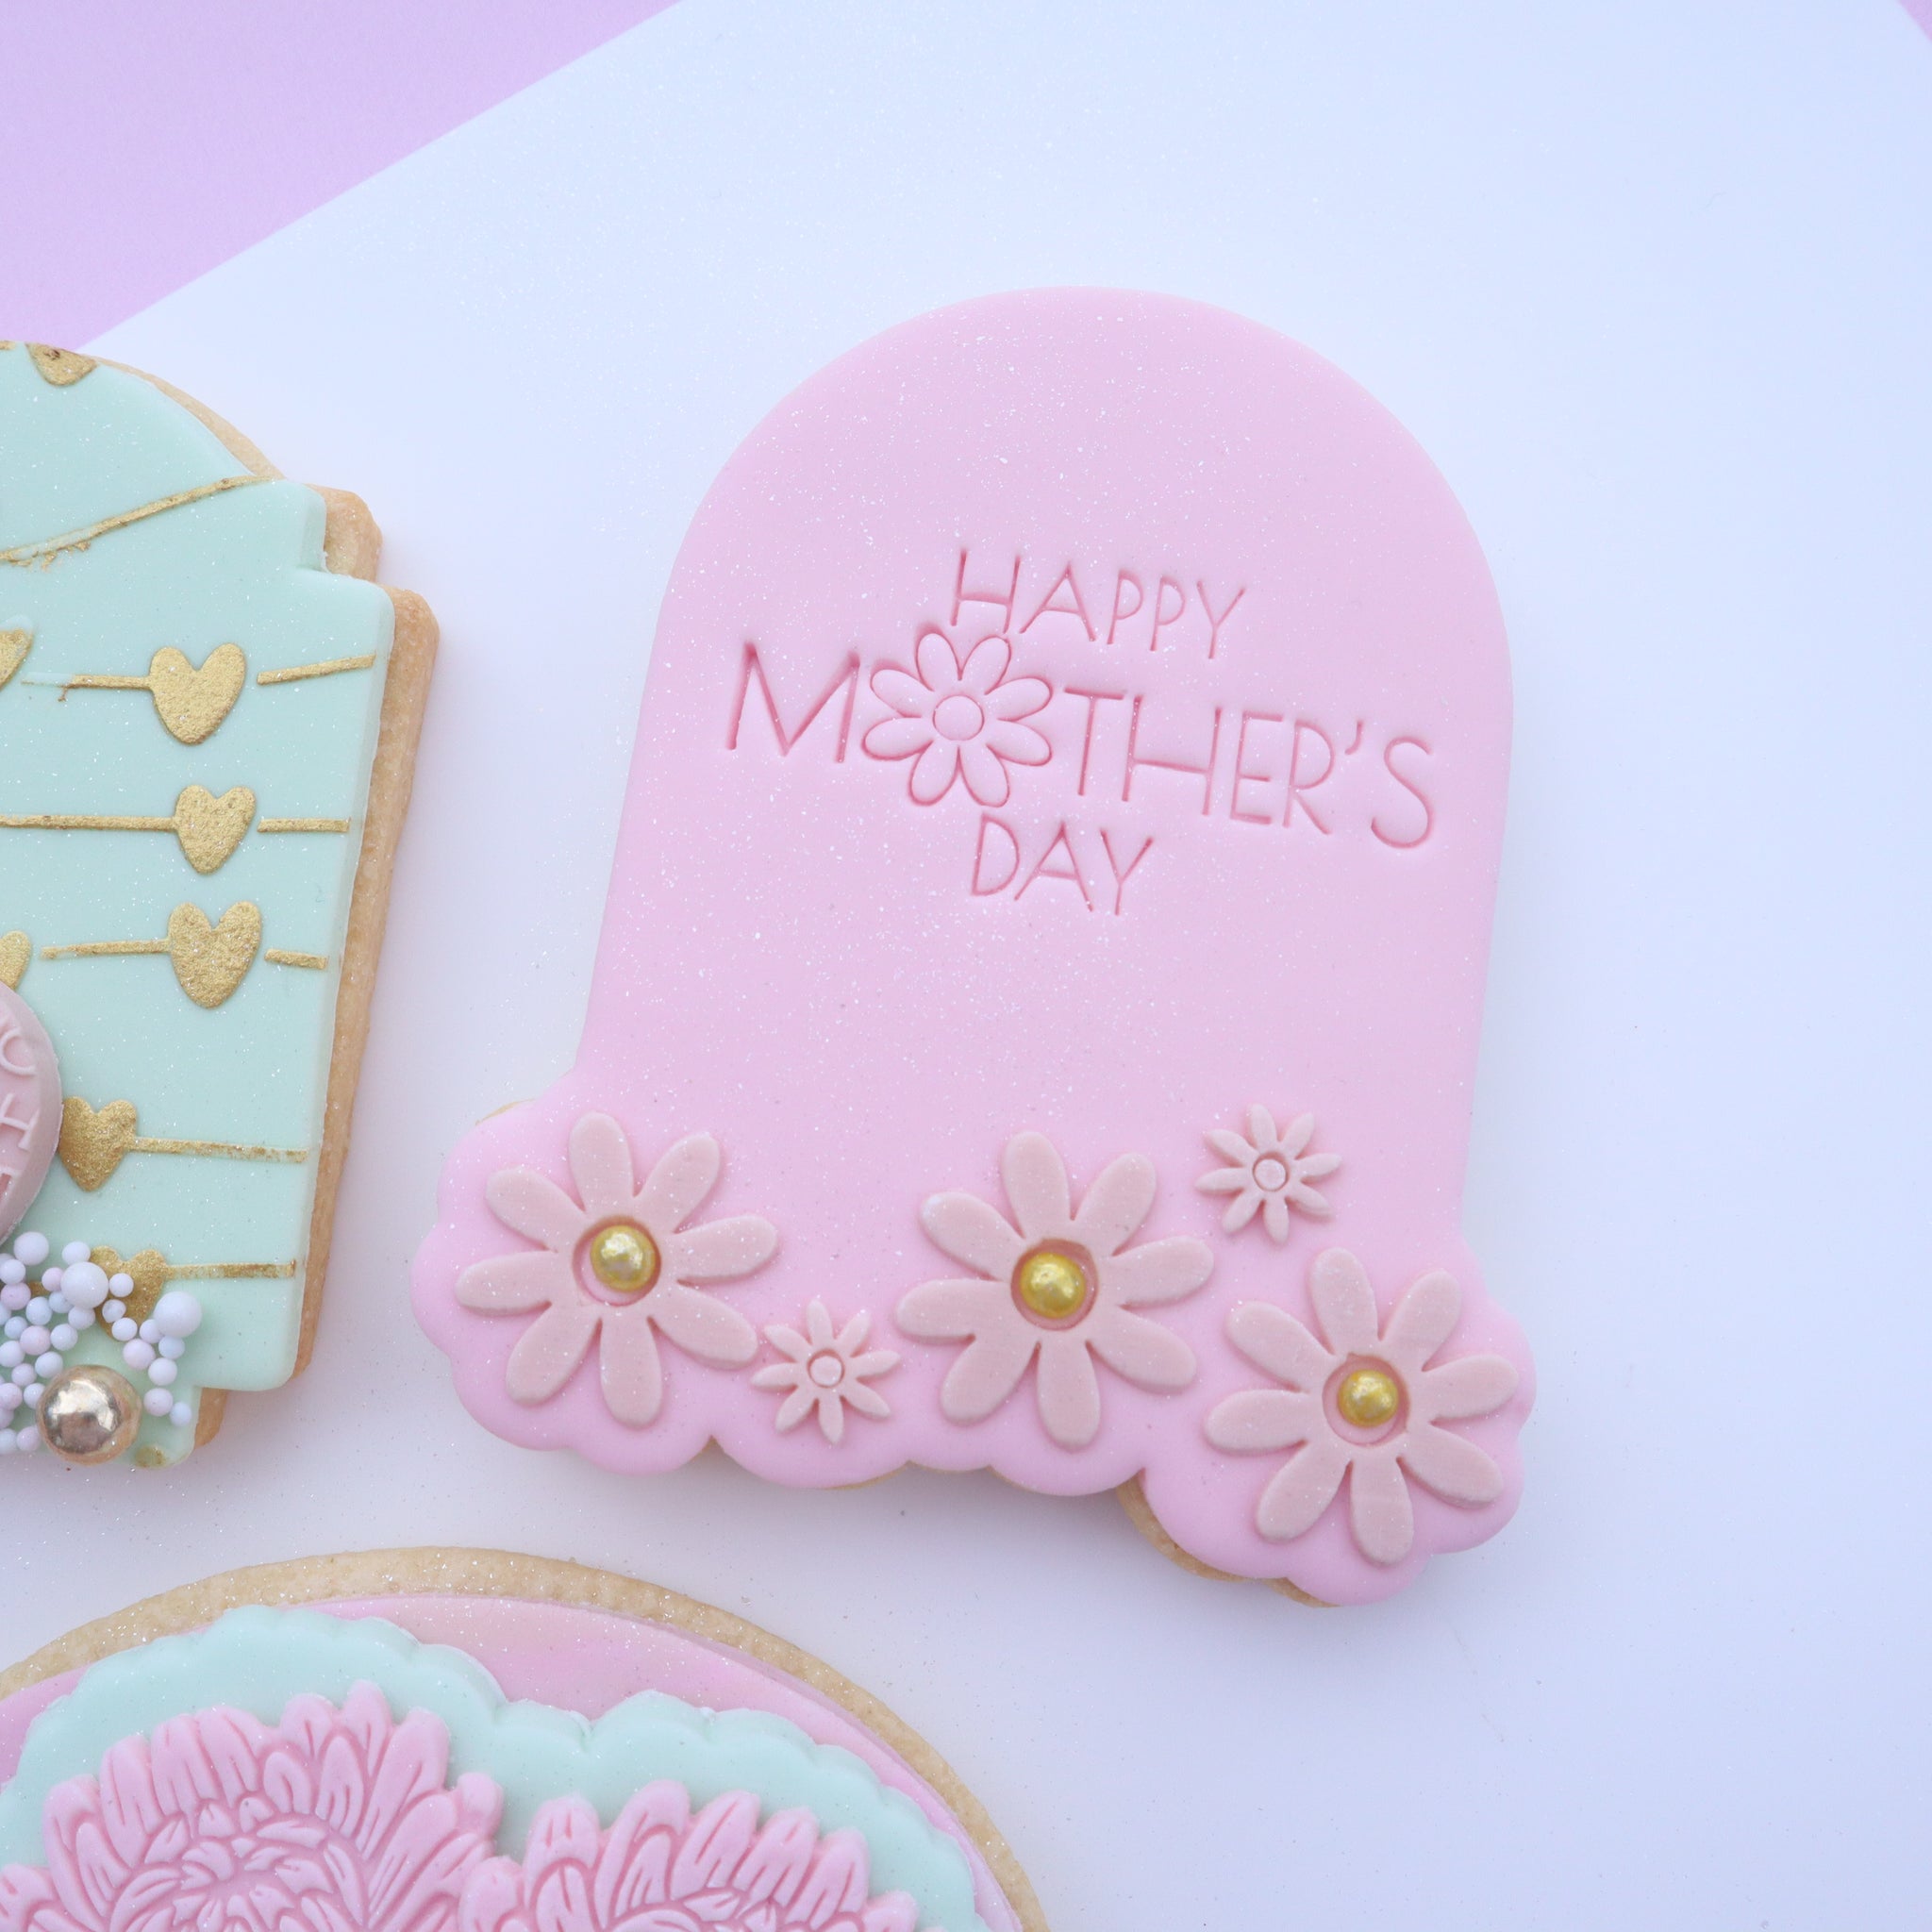 Mother's Day Cookie Classes